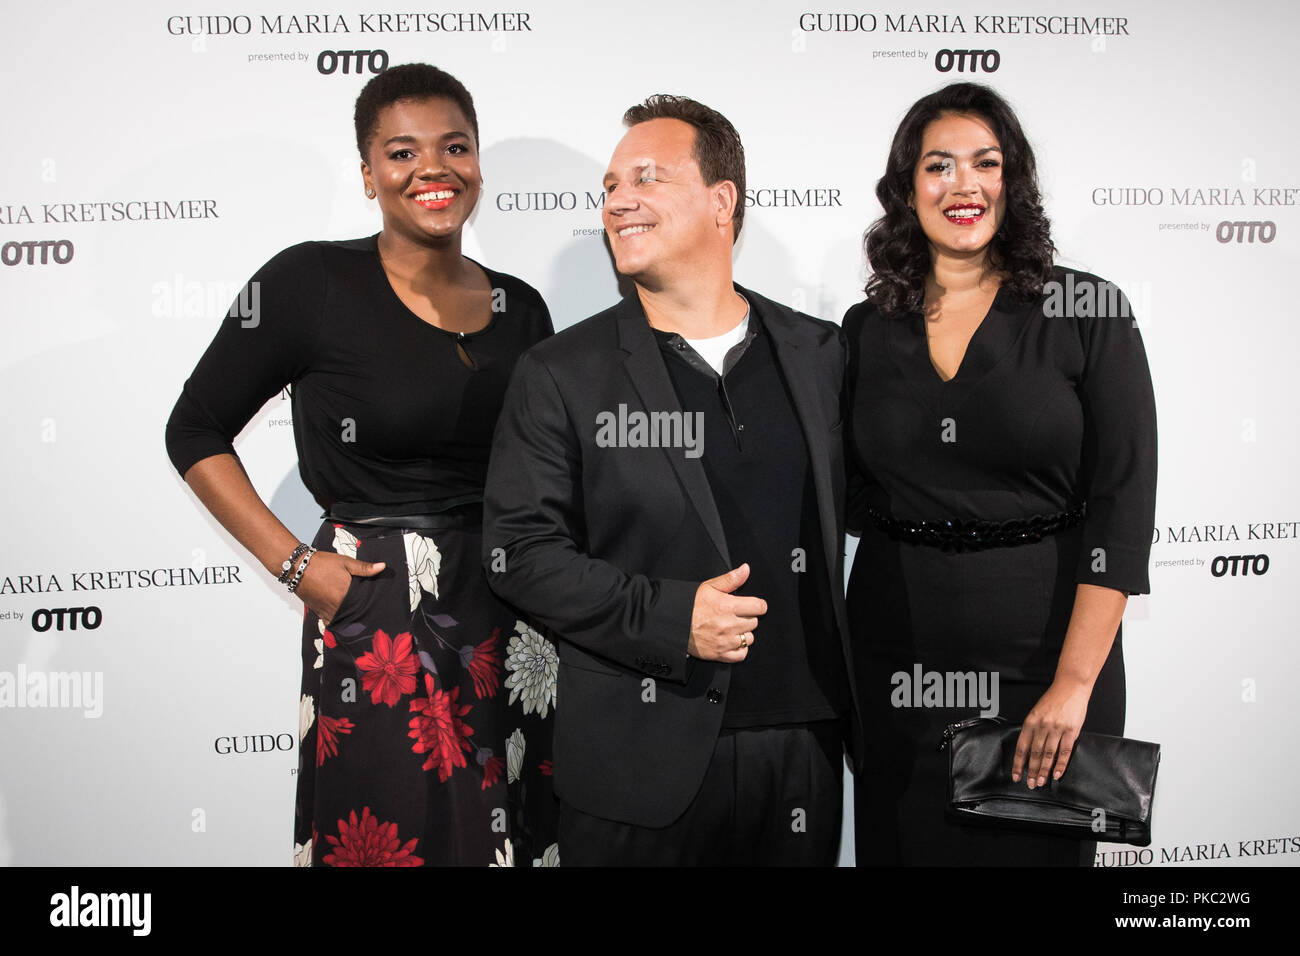 11 September 2018, Hamburg: Designer Guido Maria Kretschmer (M) and two  models present pieces from his "Curvy Collection". Under the motto "Size  Revolution", the designer presents his new "Curvy Collection presented by